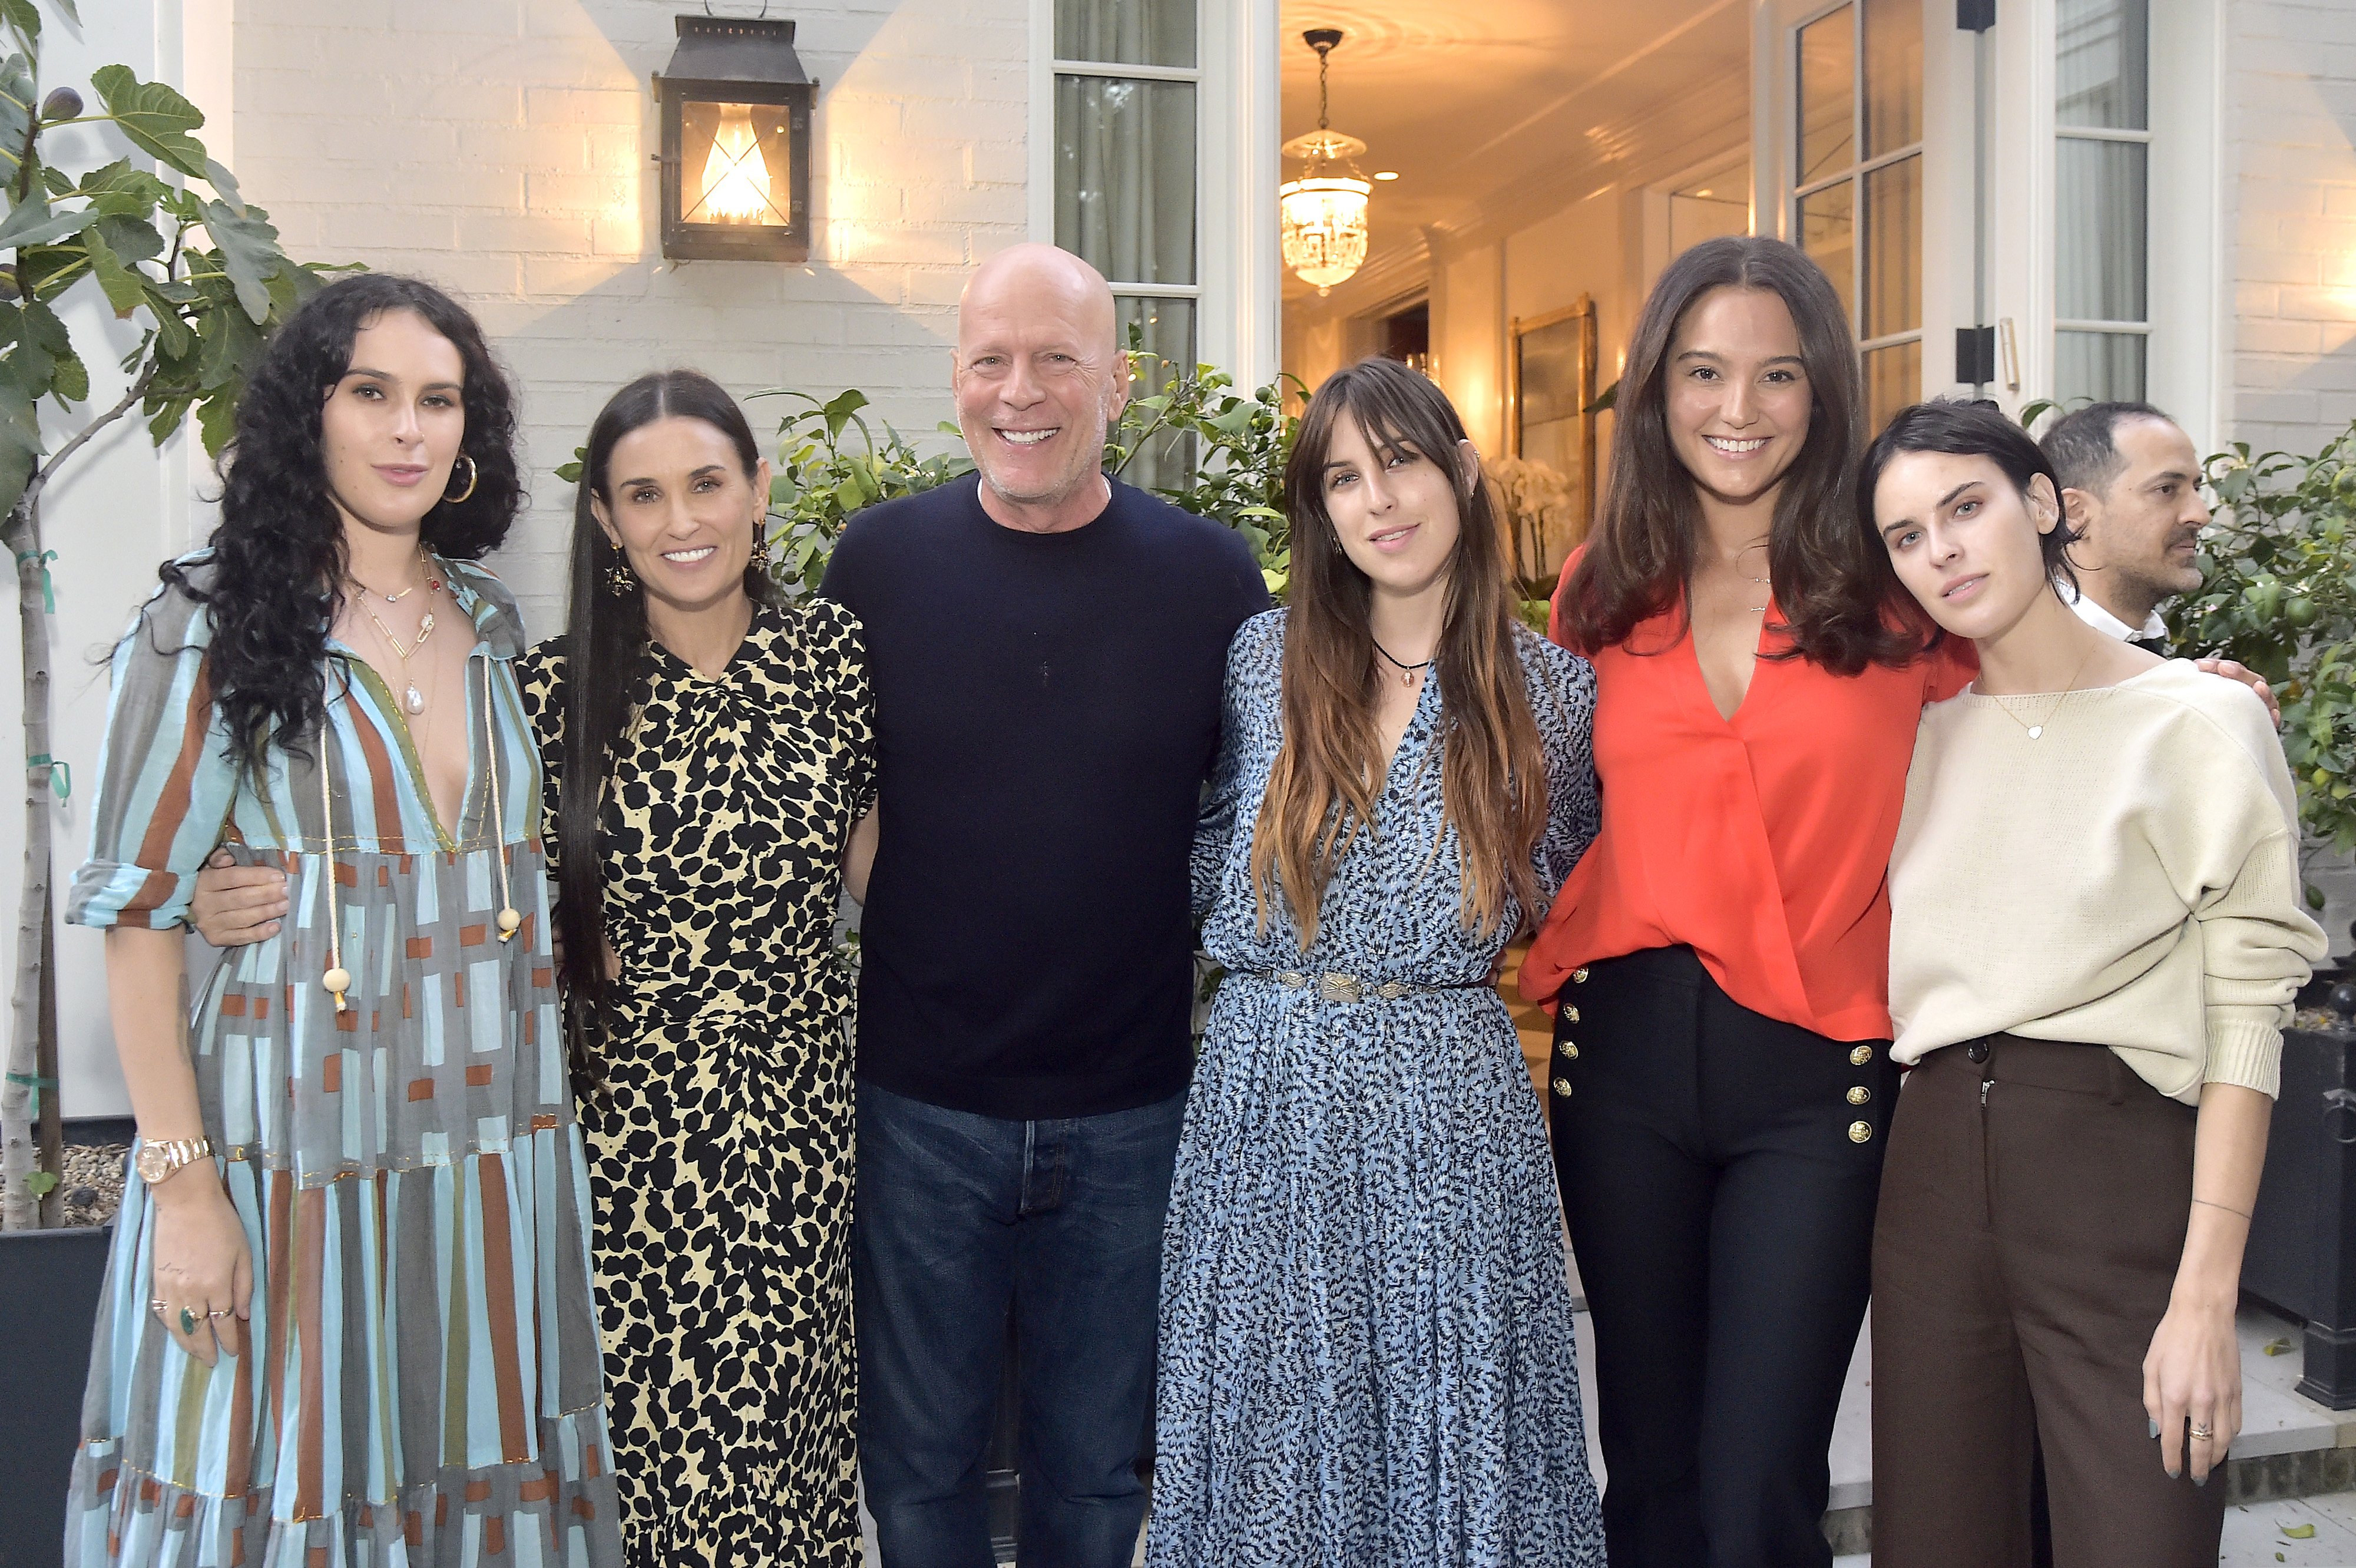 Rumer Willis, Demi Moore, Bruce Willis, Scout Willis, Emma Heming Willis and Tallulah Willis attend Demi Moore's "Inside Out" book party on September 23, 2019 in Los Angeles, California.┃Source: Getty Images